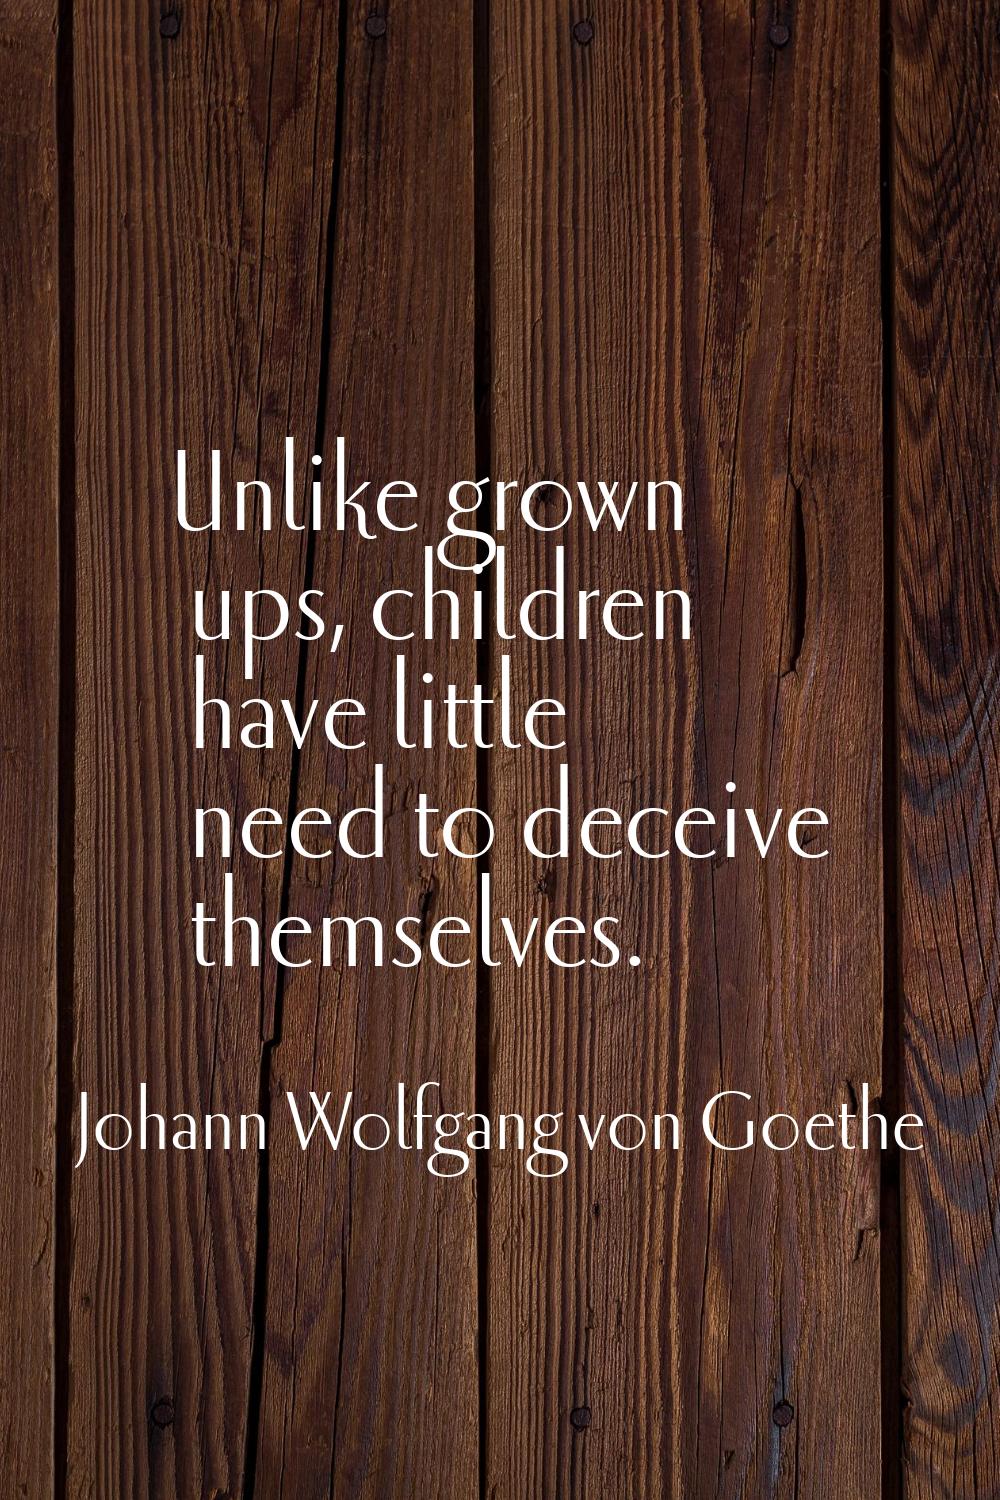 Unlike grown ups, children have little need to deceive themselves.